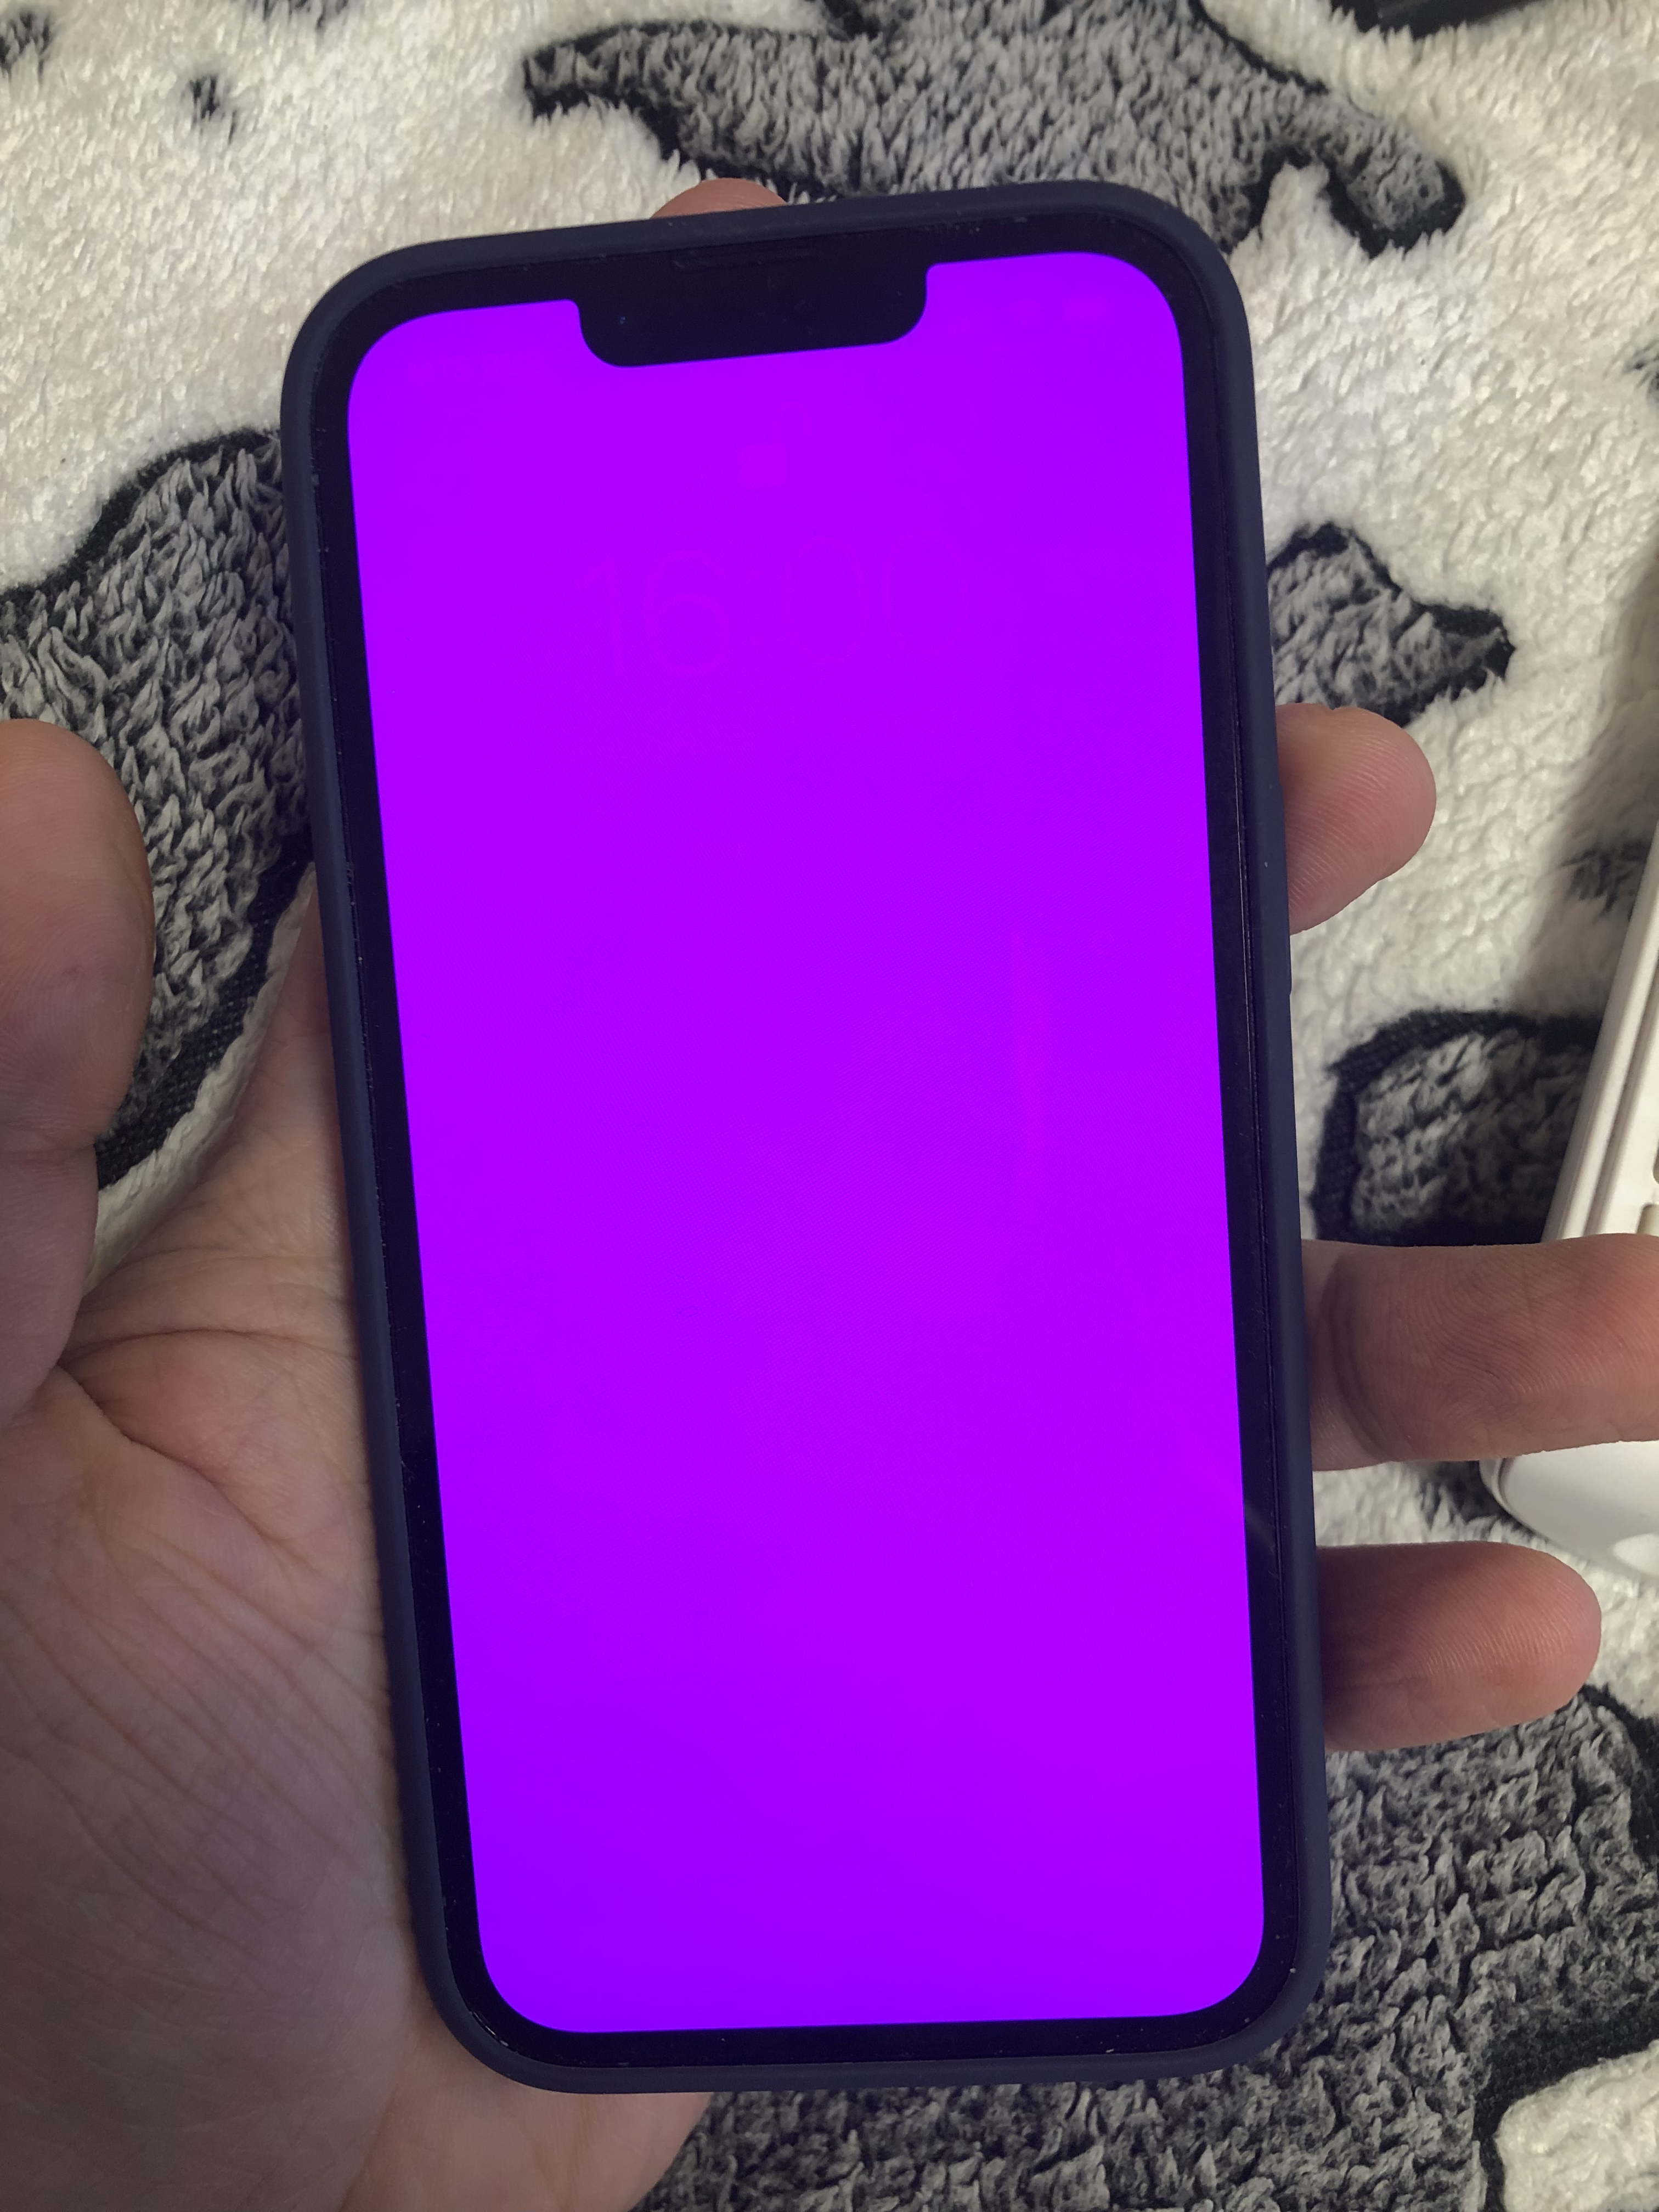 Some iPhone 11 Pro series units may be suffering from a green tint display  issue - News, iphone 11 pro 